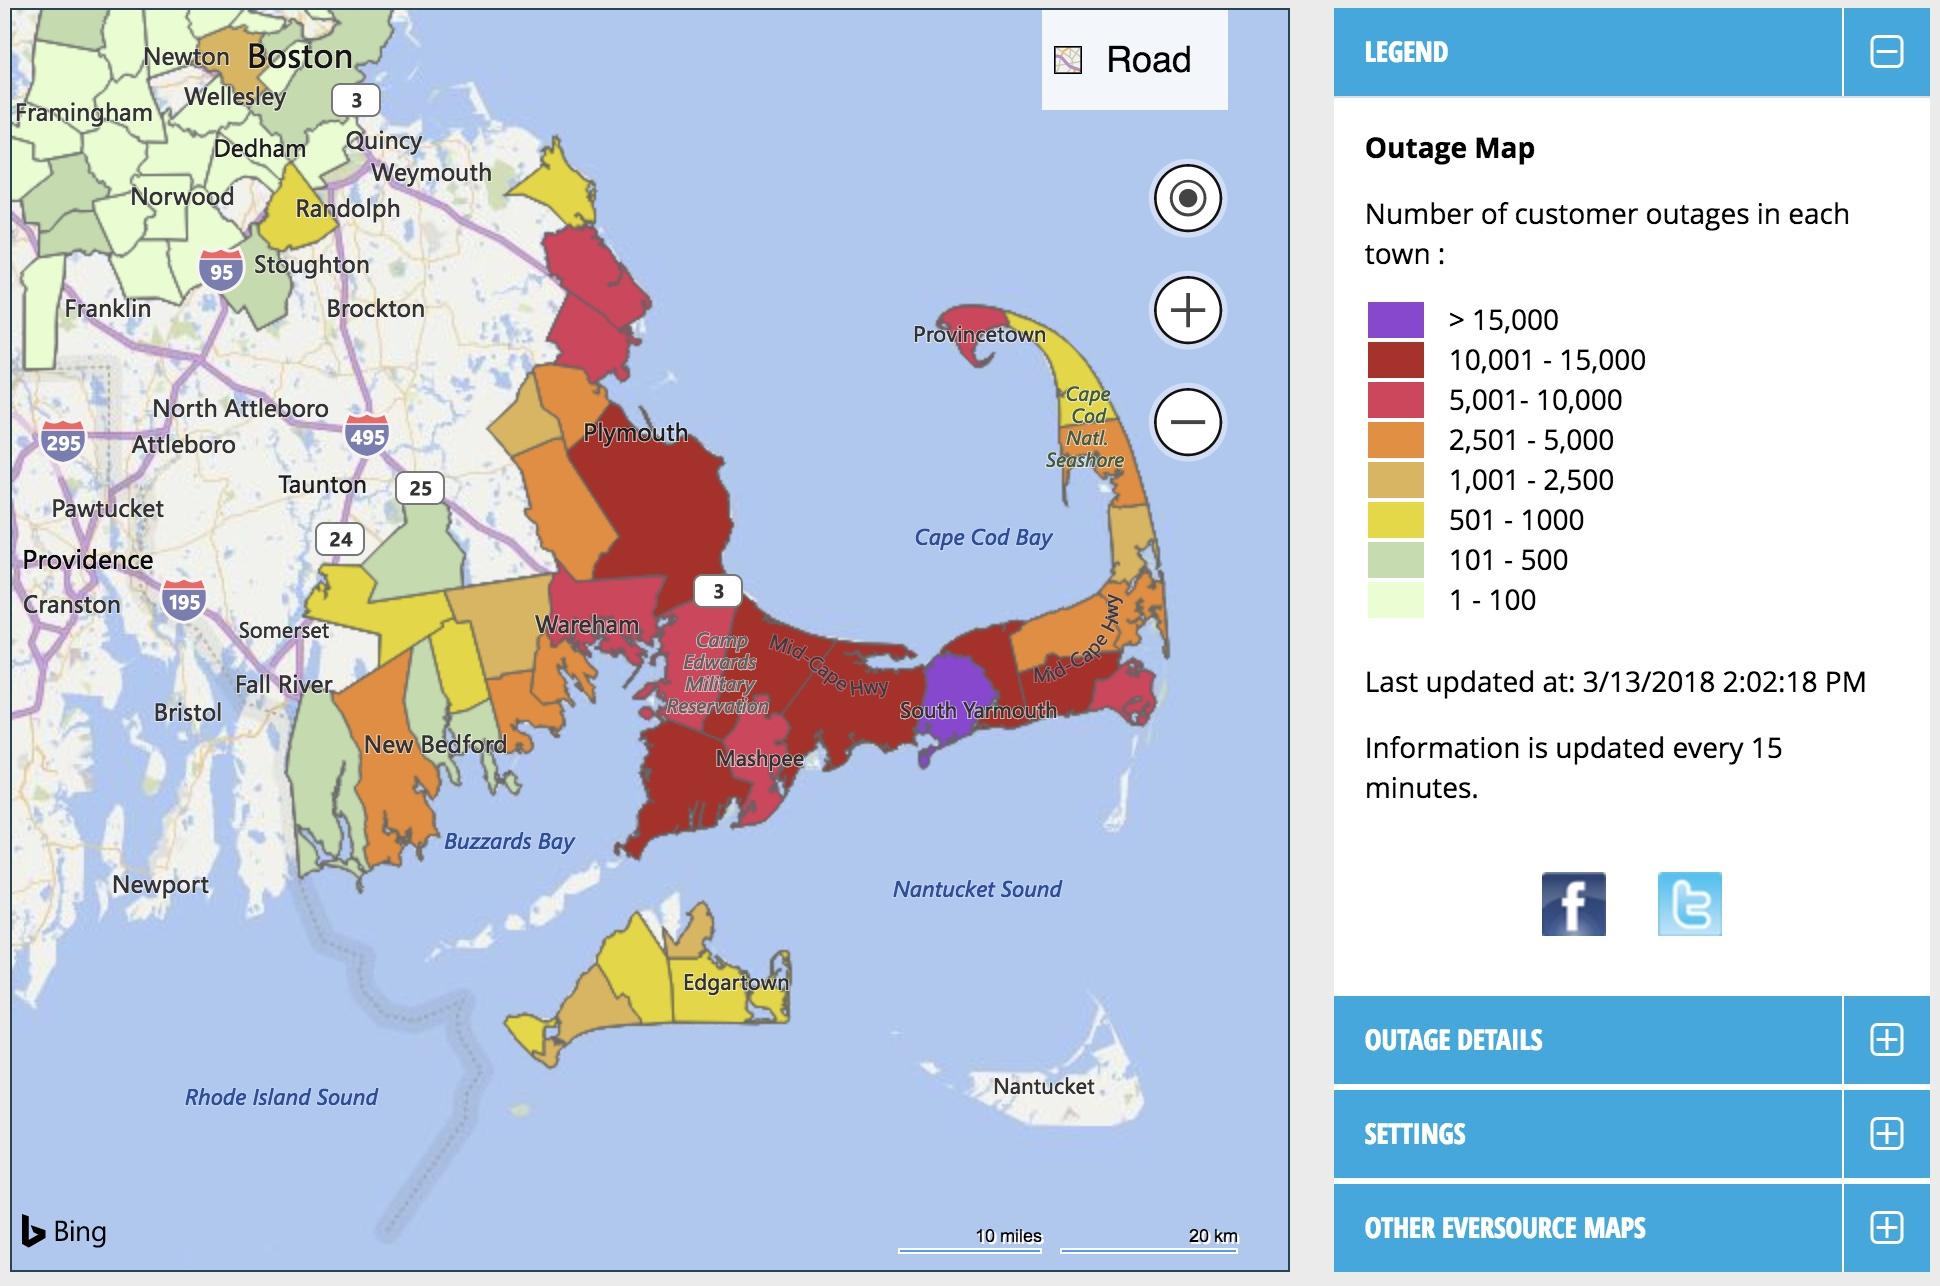 national grid outage map massachusetts